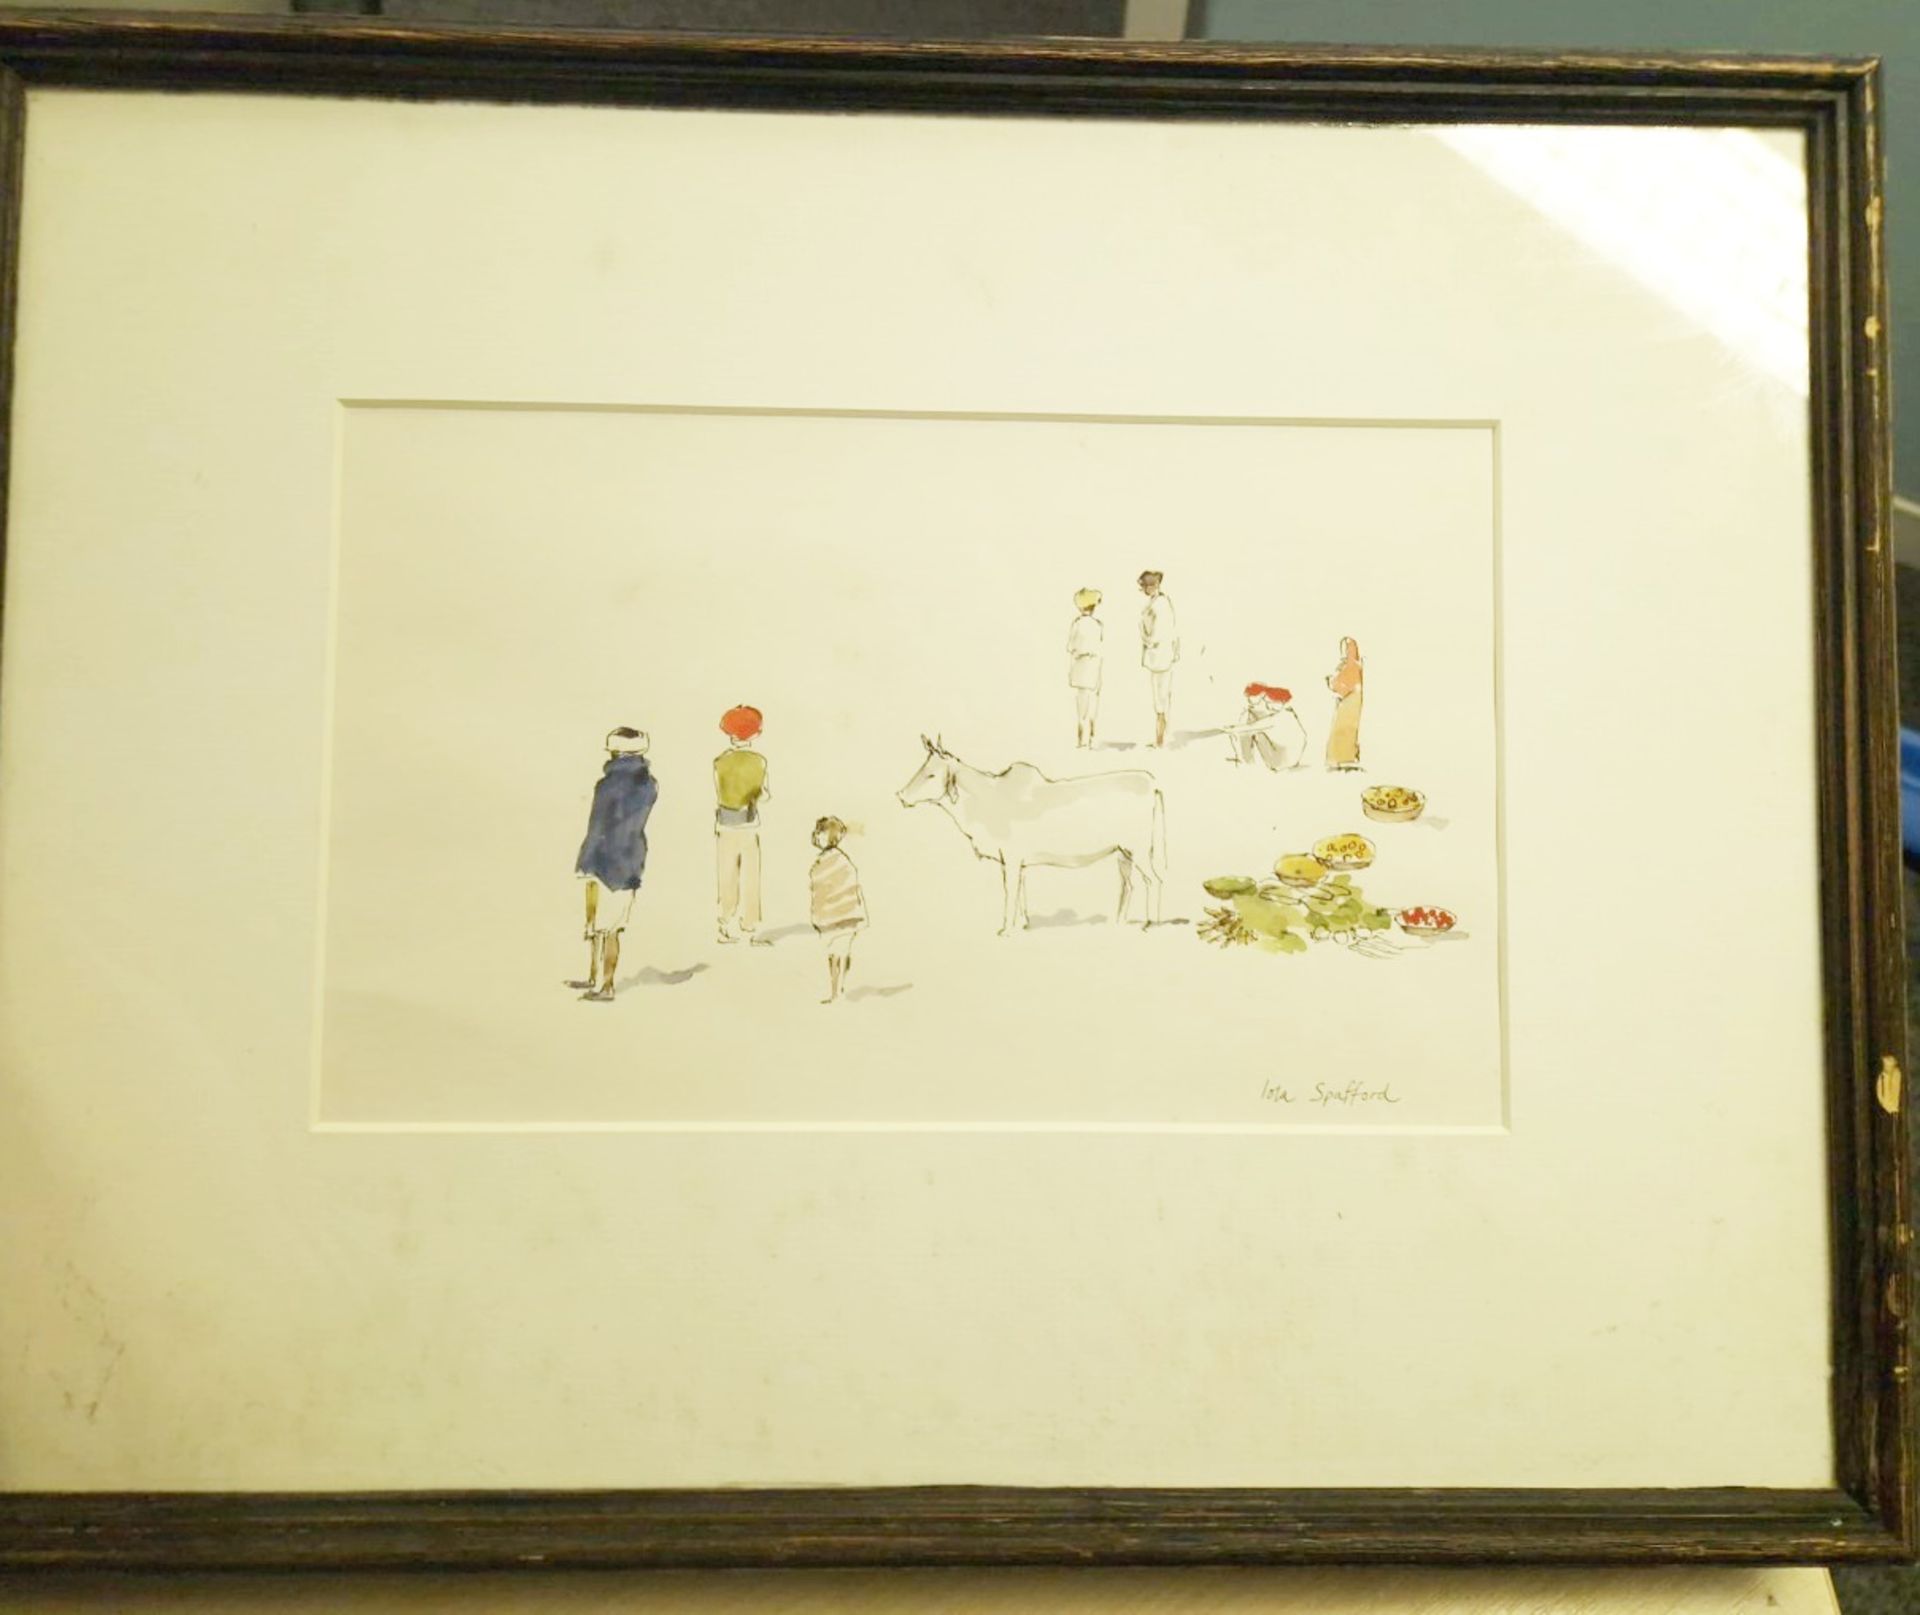 1 x ‘Mount Abu Market’ Watercolour By Iola Spafford Mounted And Framed In A Dark Wood Frame